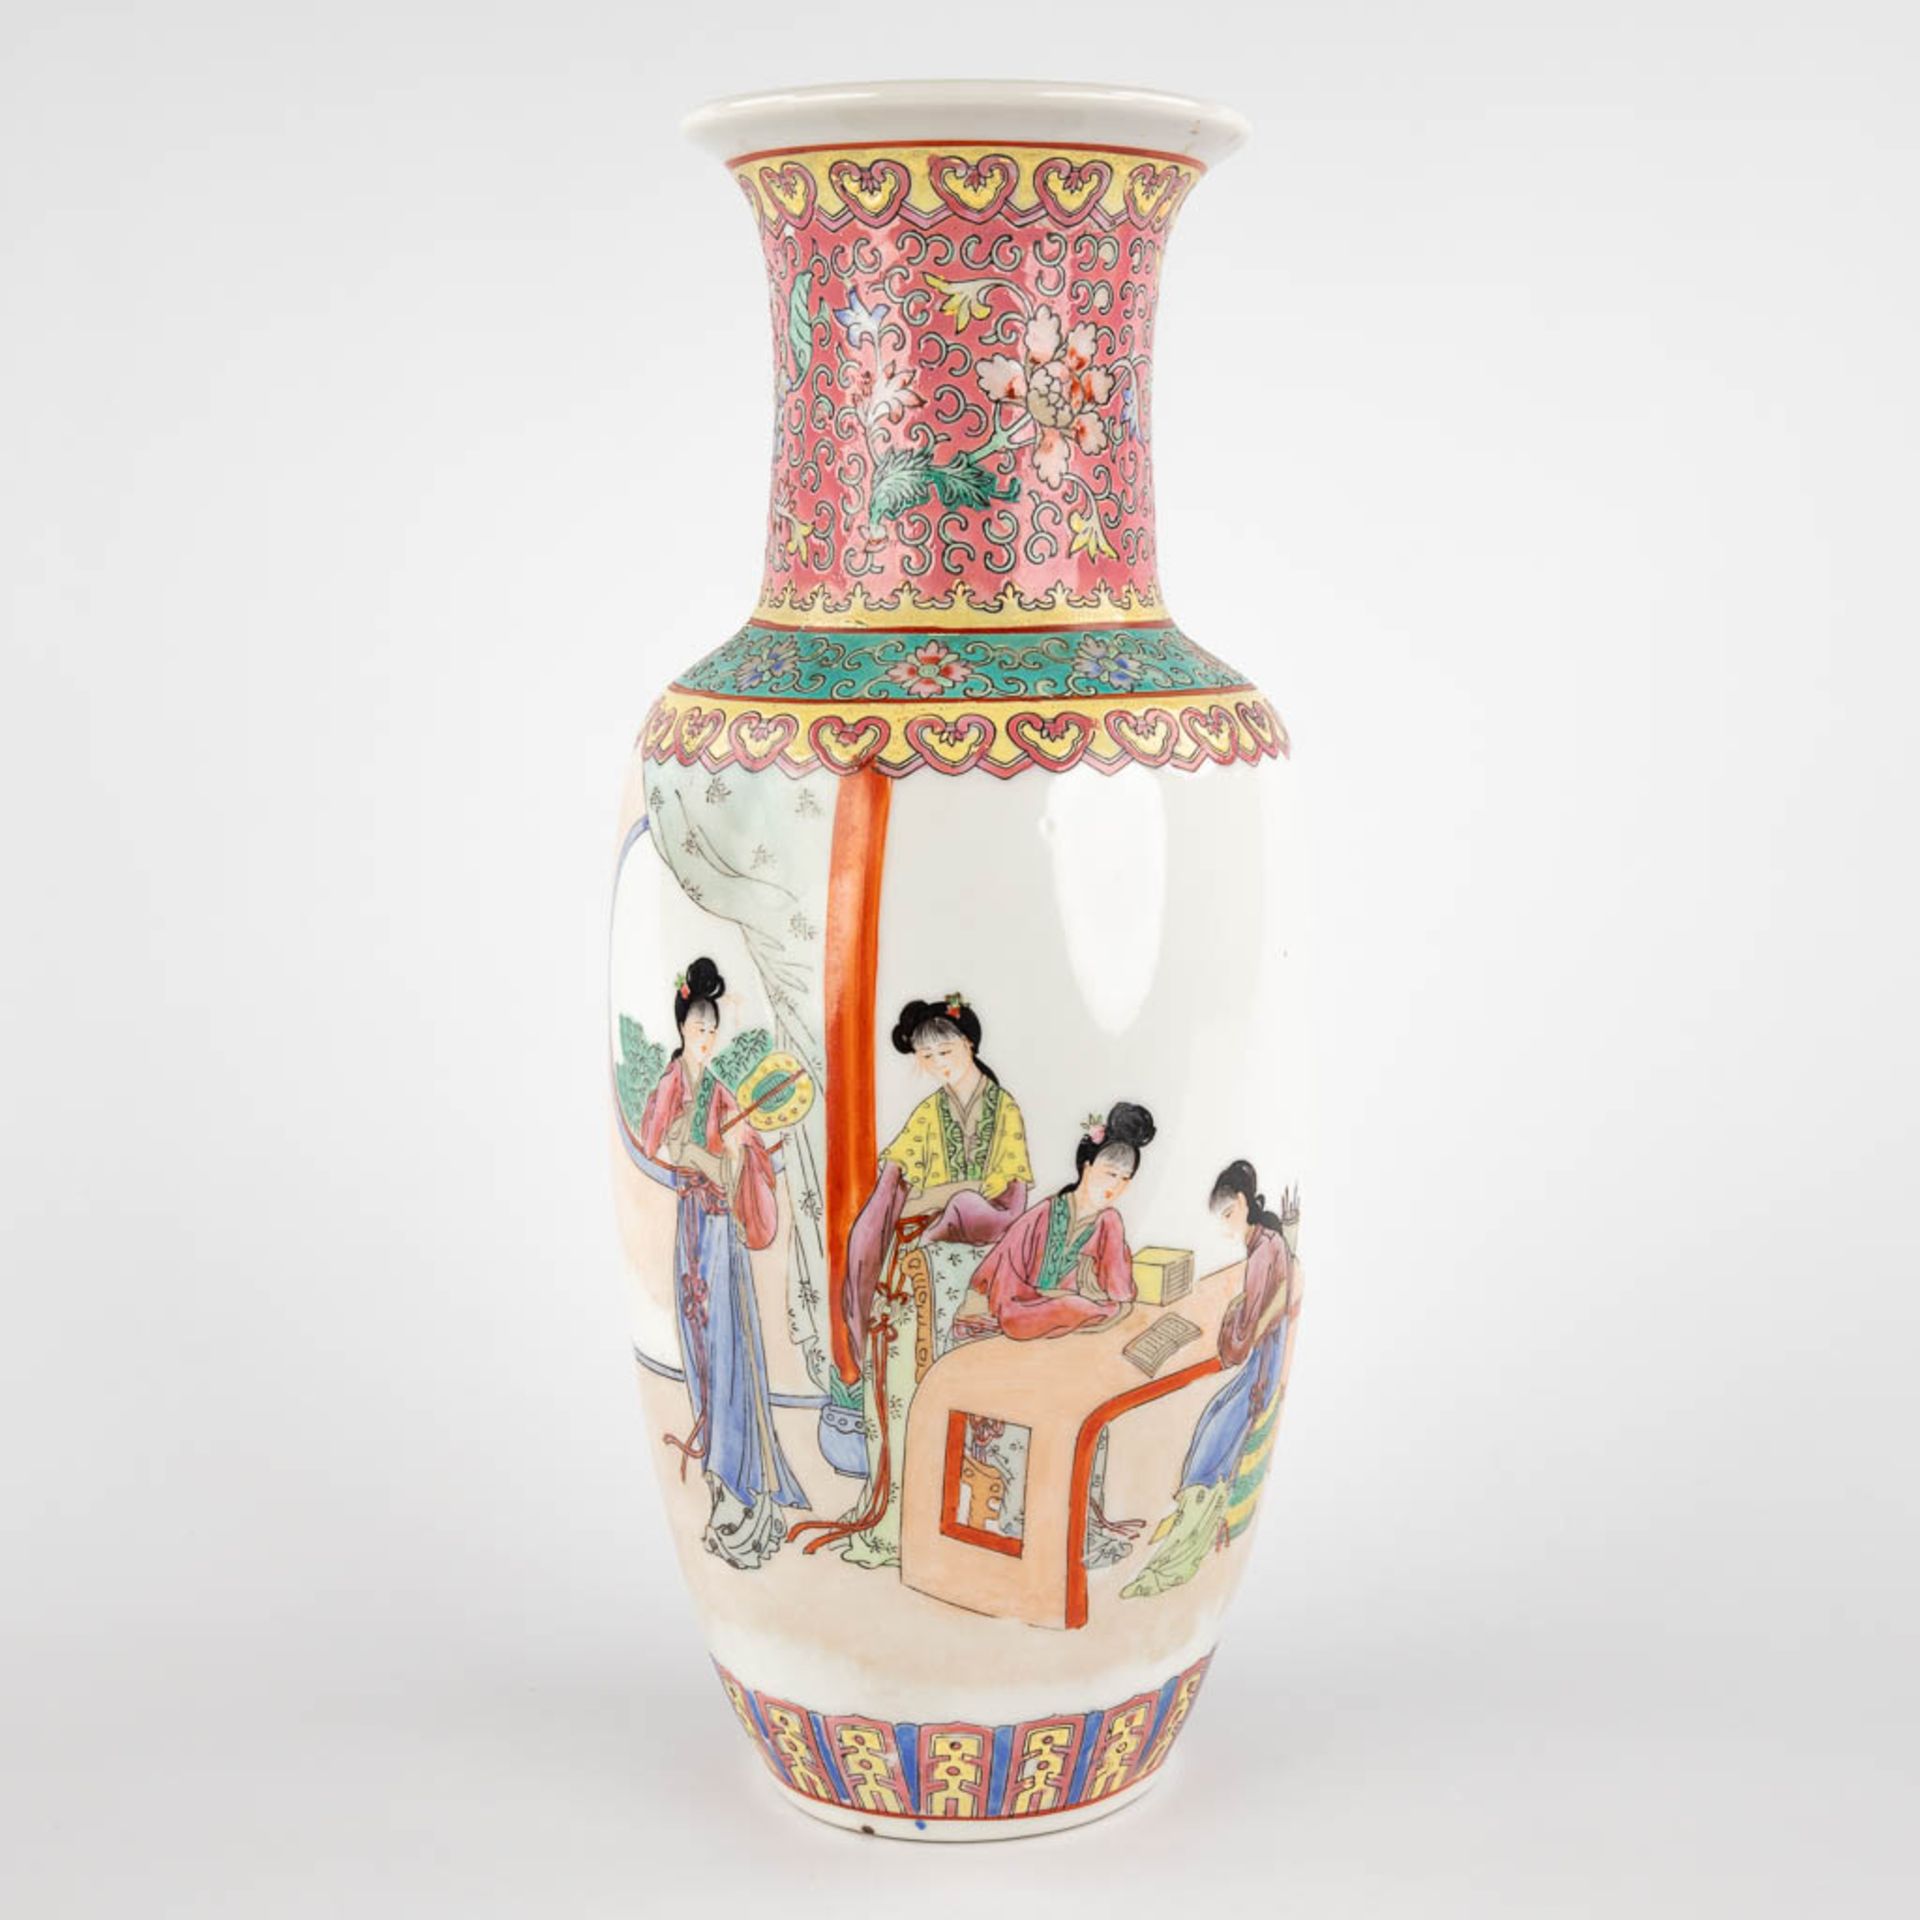 A Chinese vase with decor of Ladies at a desk, 20th C. (H:36 x D:14,5 cm)